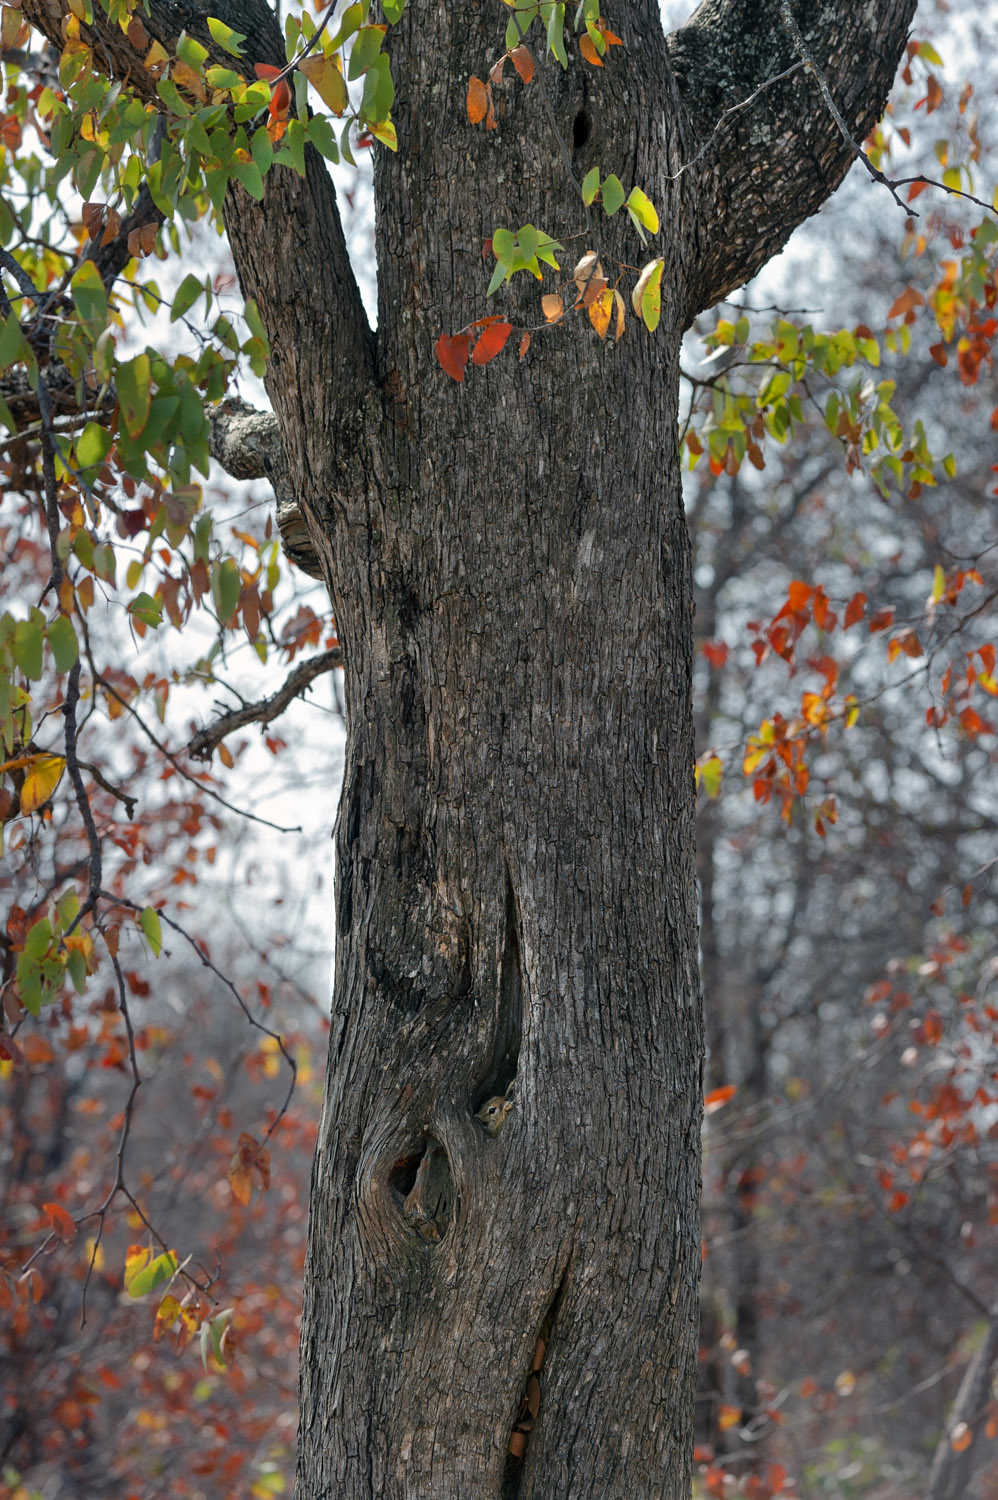 Smith's Bush Squirrel in its hiding place, Kruger NP